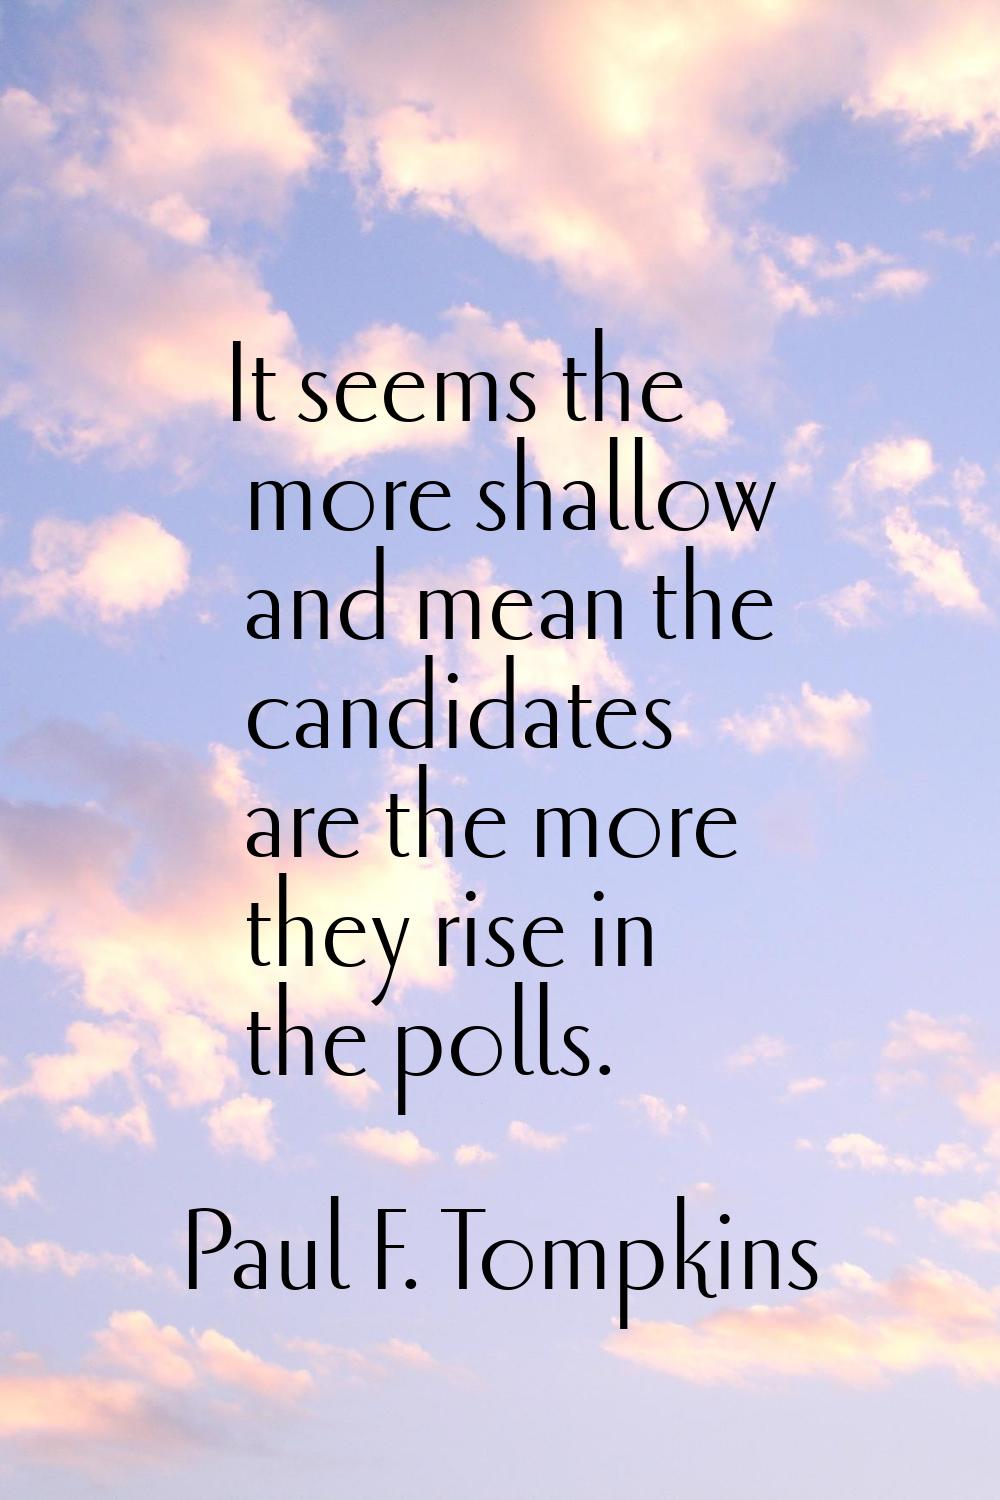 It seems the more shallow and mean the candidates are the more they rise in the polls.